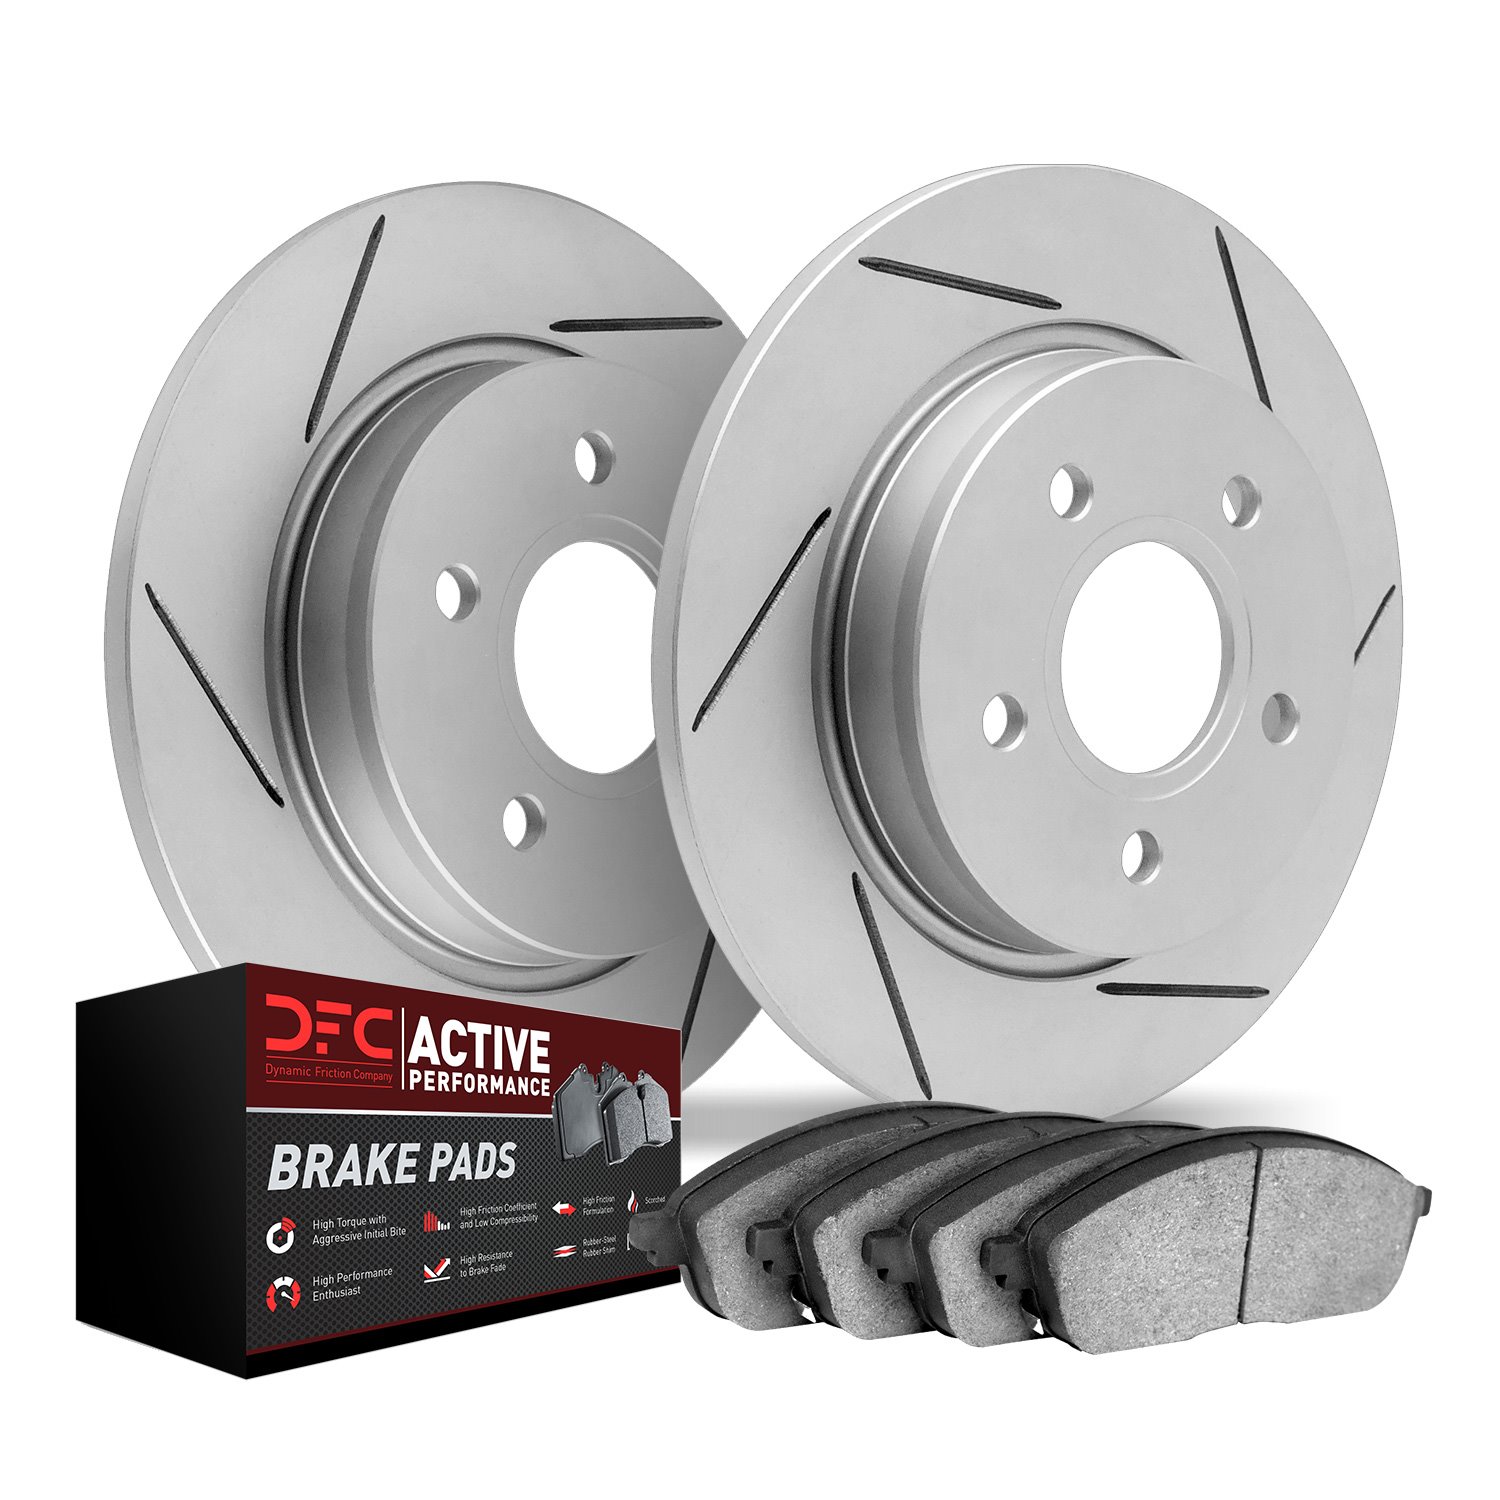 2702-74006 Geoperformance Slotted Brake Rotors with Active Performance Pads Kits, 1997-2005 Audi/Volkswagen, Position: Rear